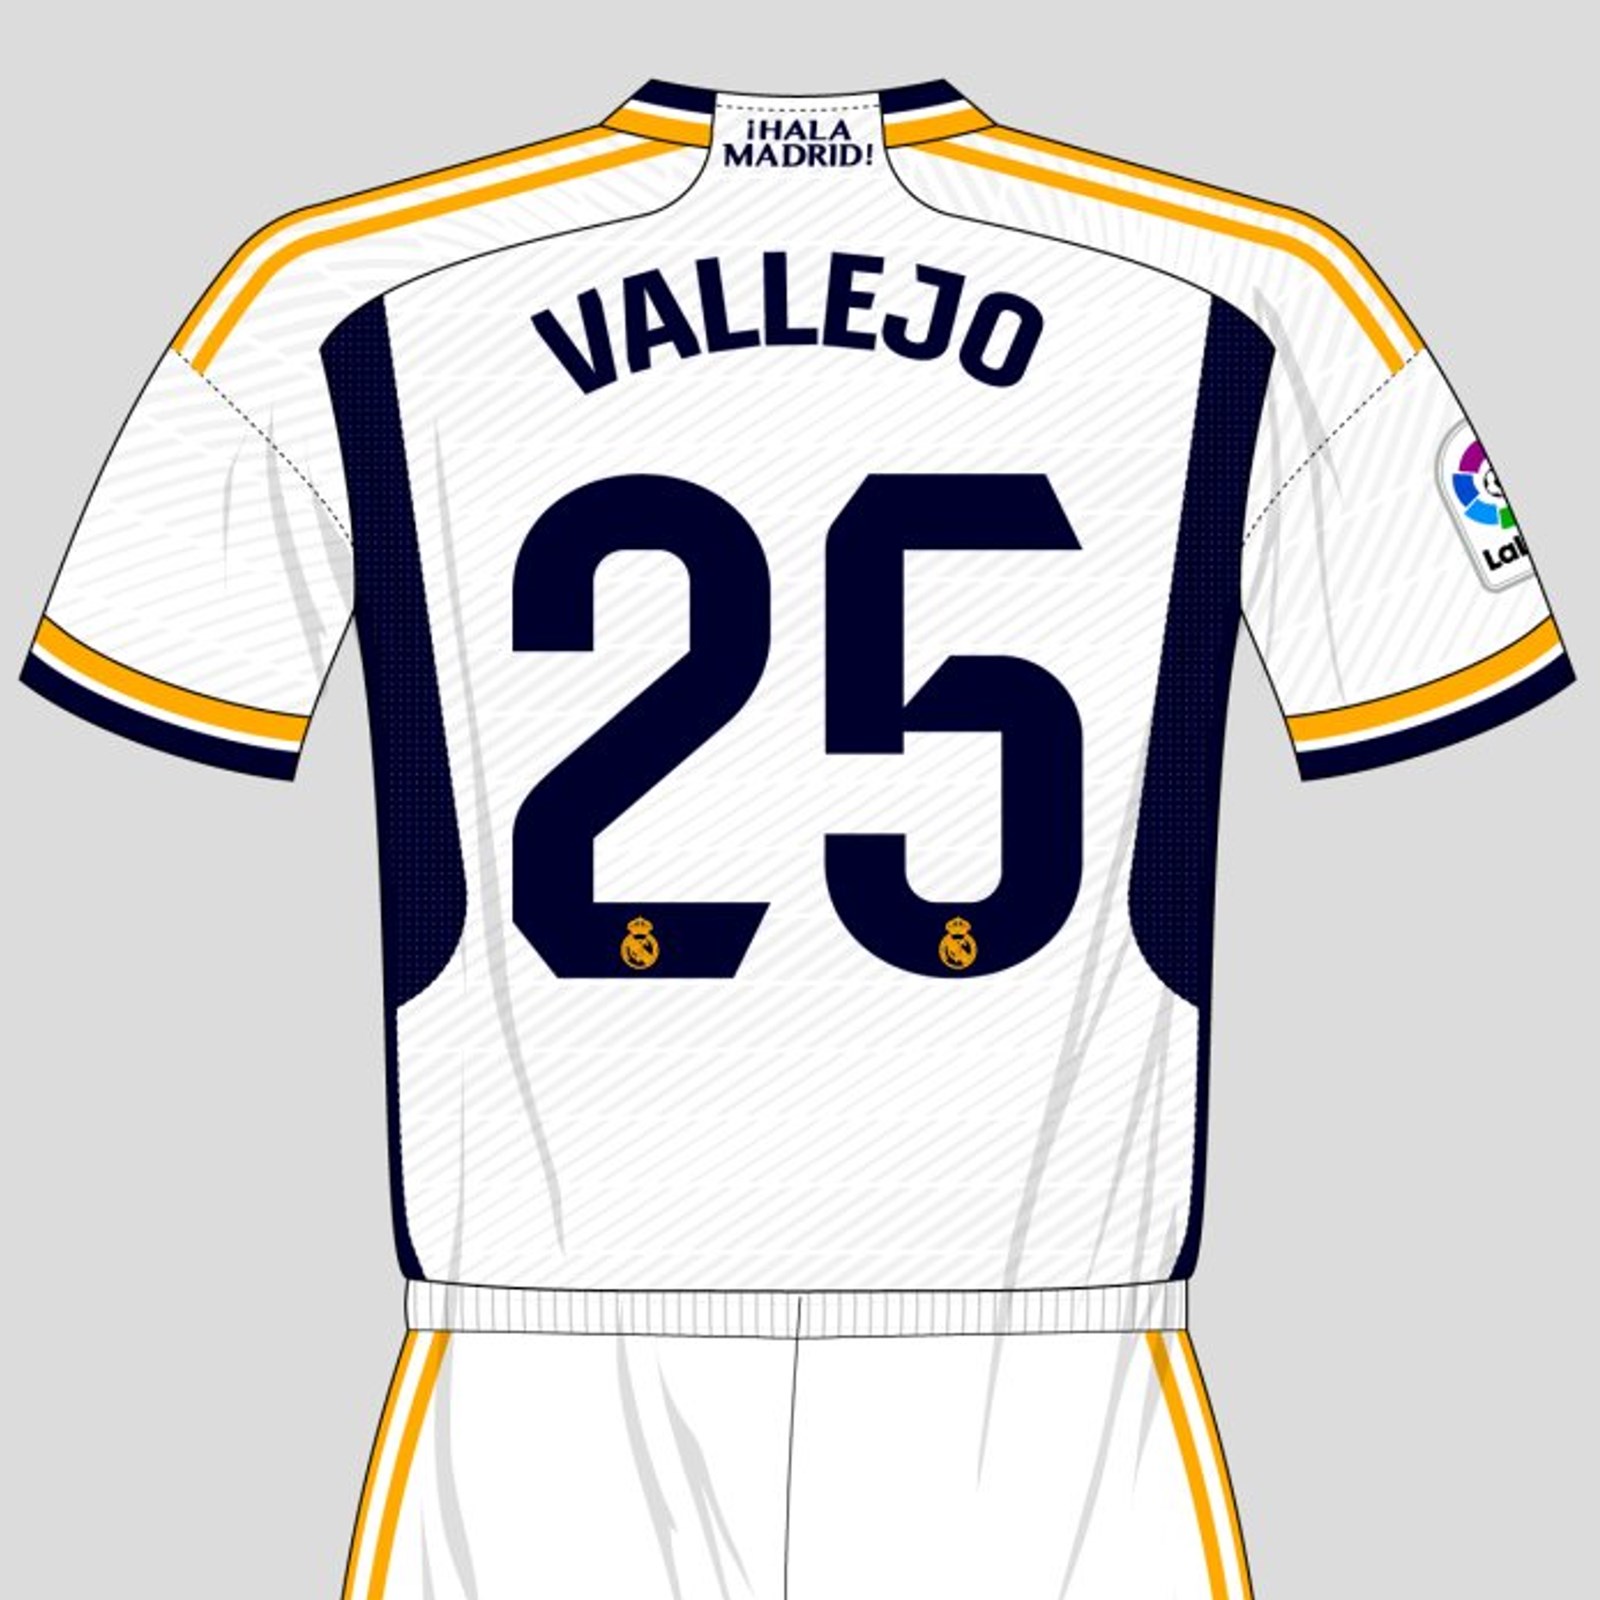 Vallejo is now listed with the number 25, leaving the 24 free for